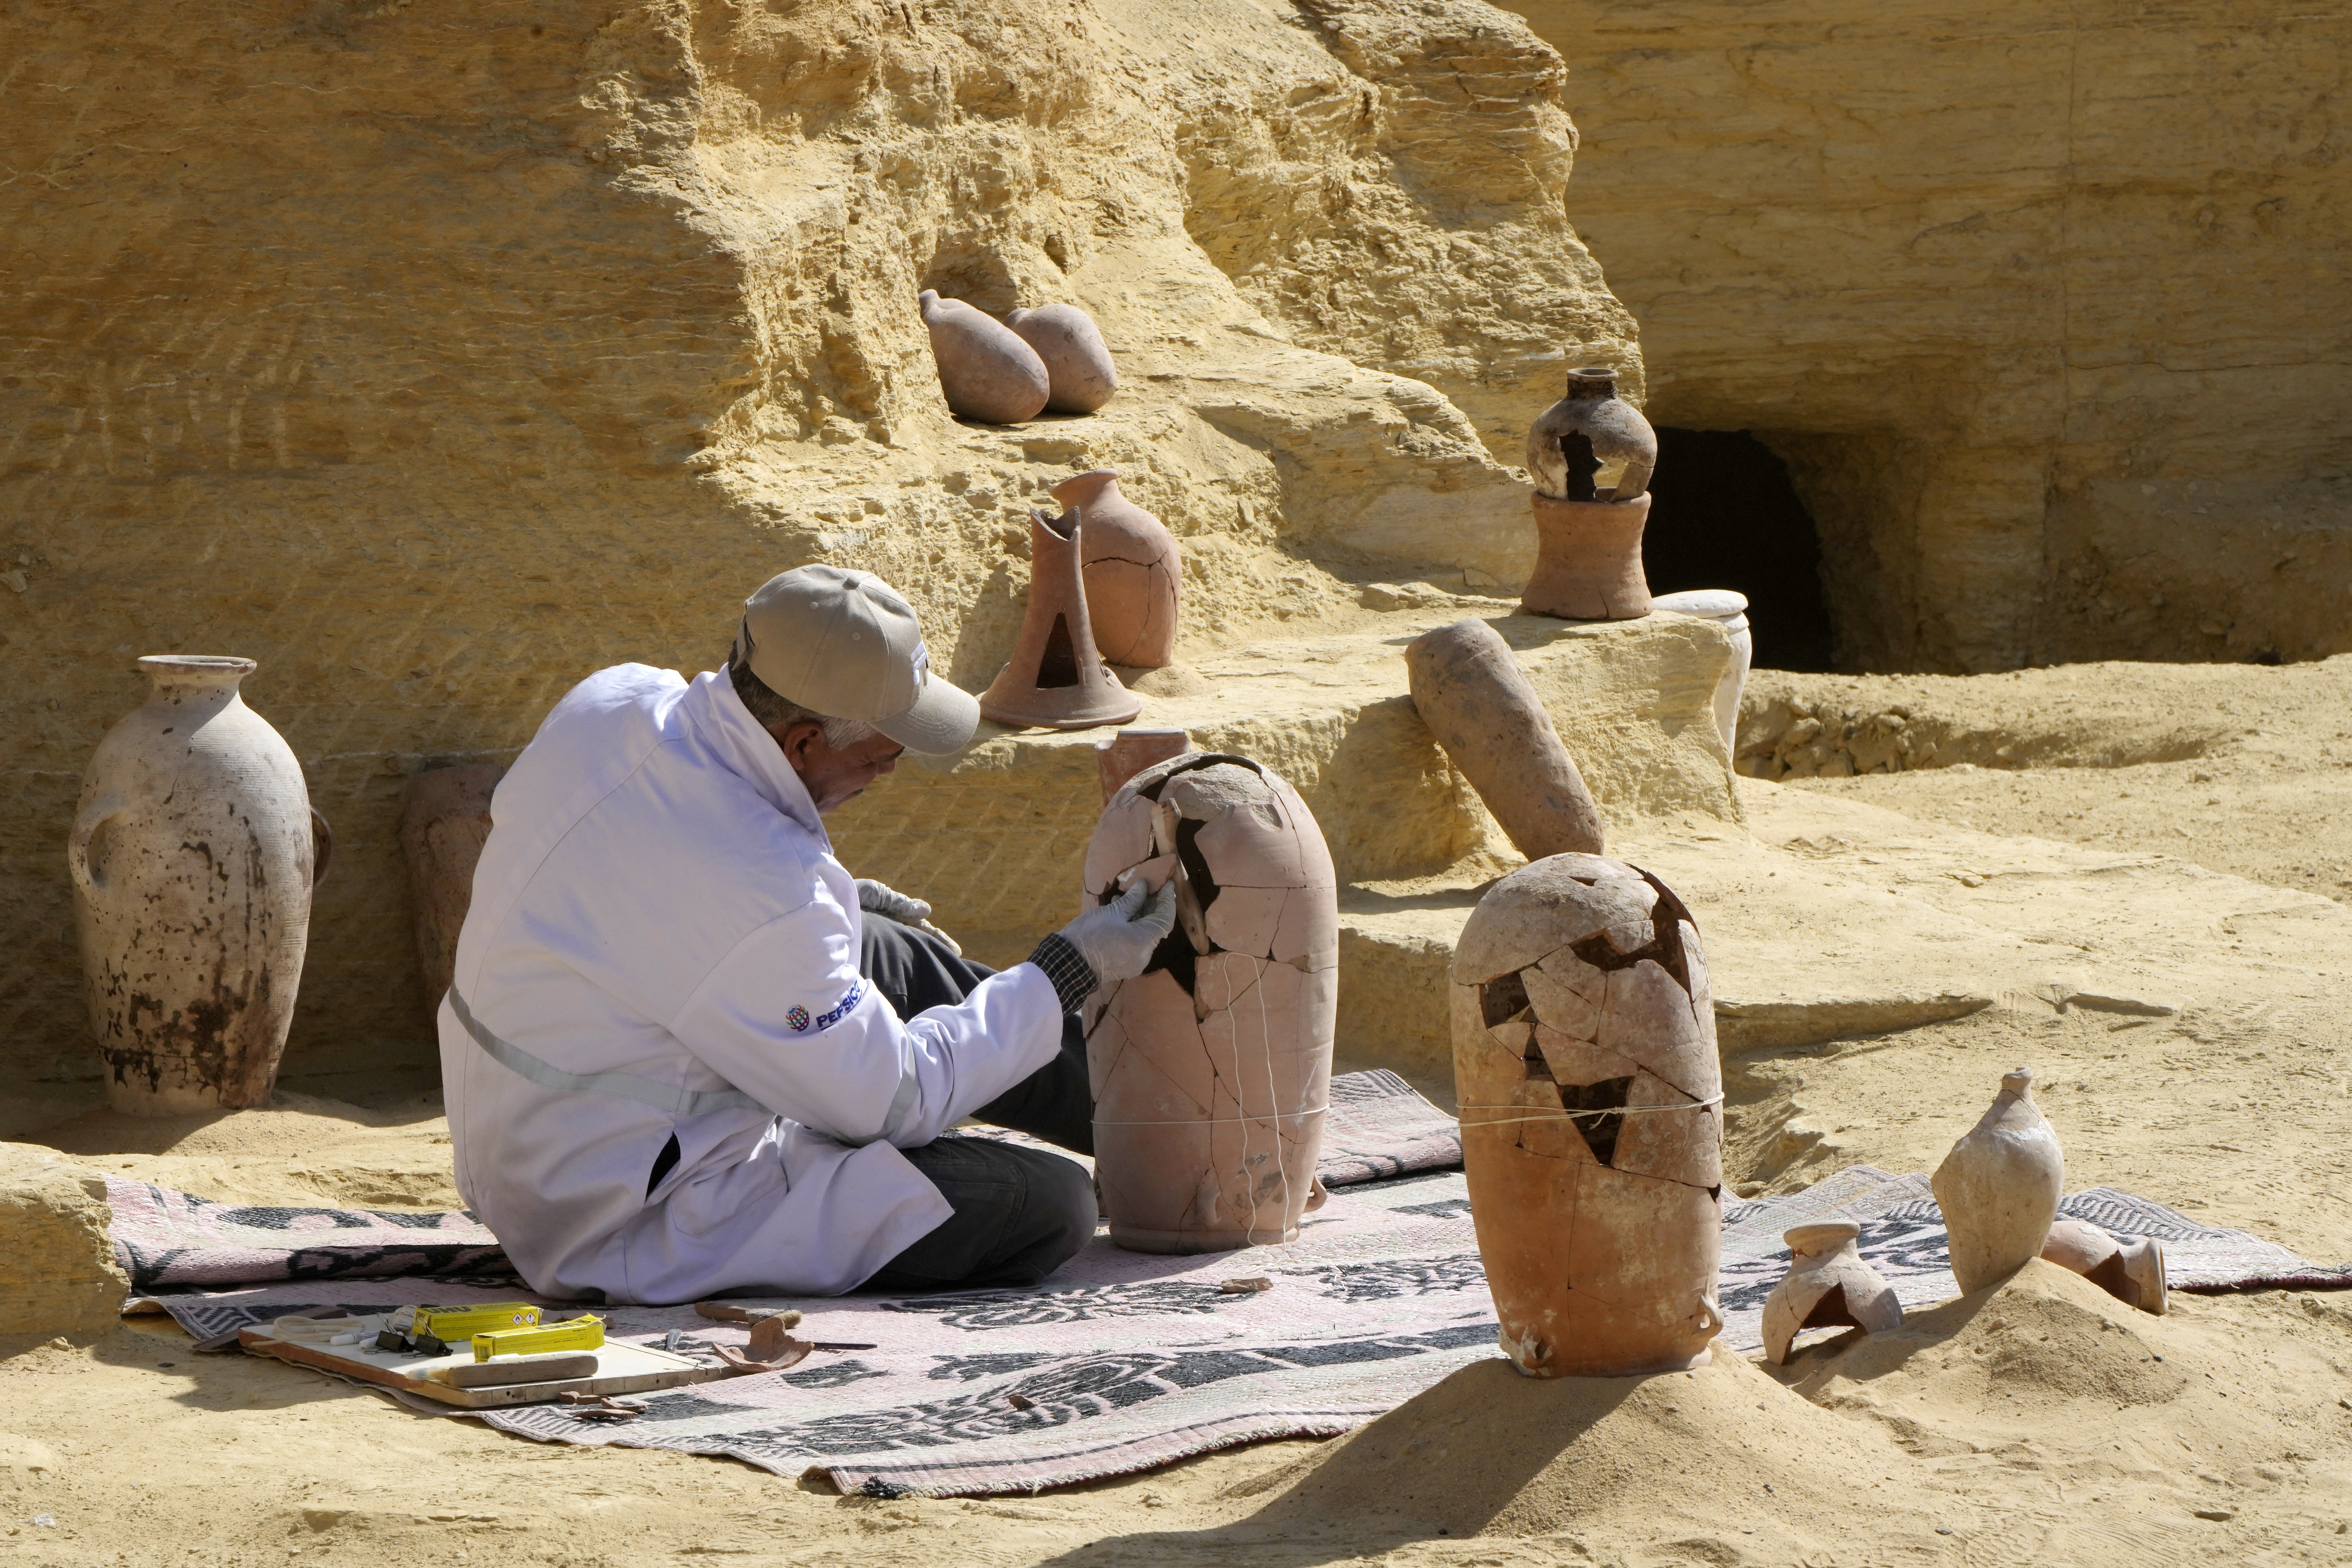 An archaeologist works on the restoration of a vessel found at the site (AP Photo/Amr Nabil)